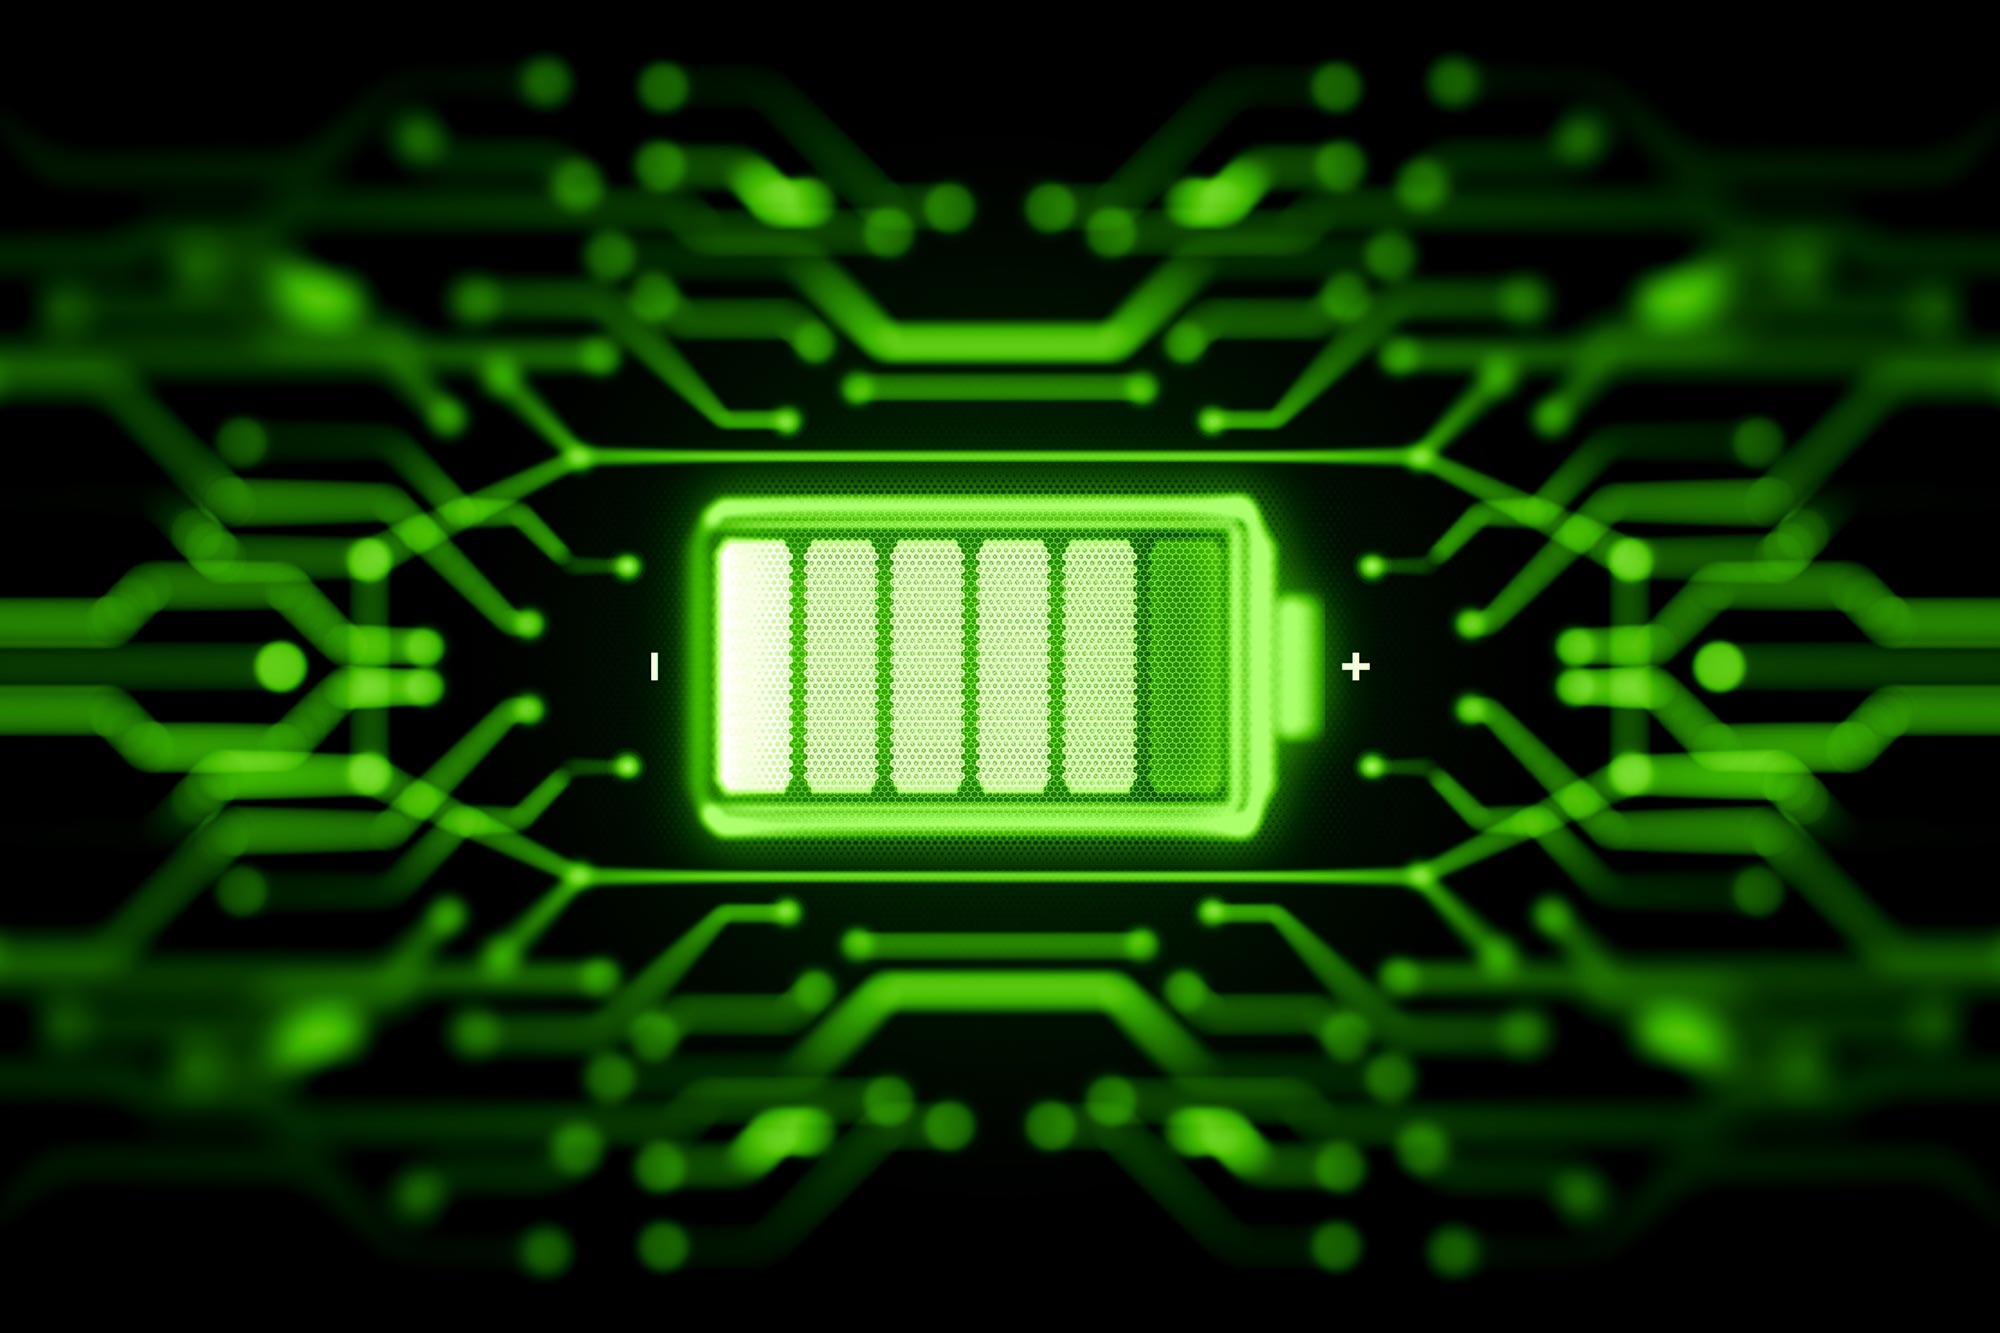 New AI-Powered App Could Boost Smartphone Battery Life by 30{a78e43caf781a4748142ac77894e52b42fd2247cba0219deedaee5032d61bfc9}